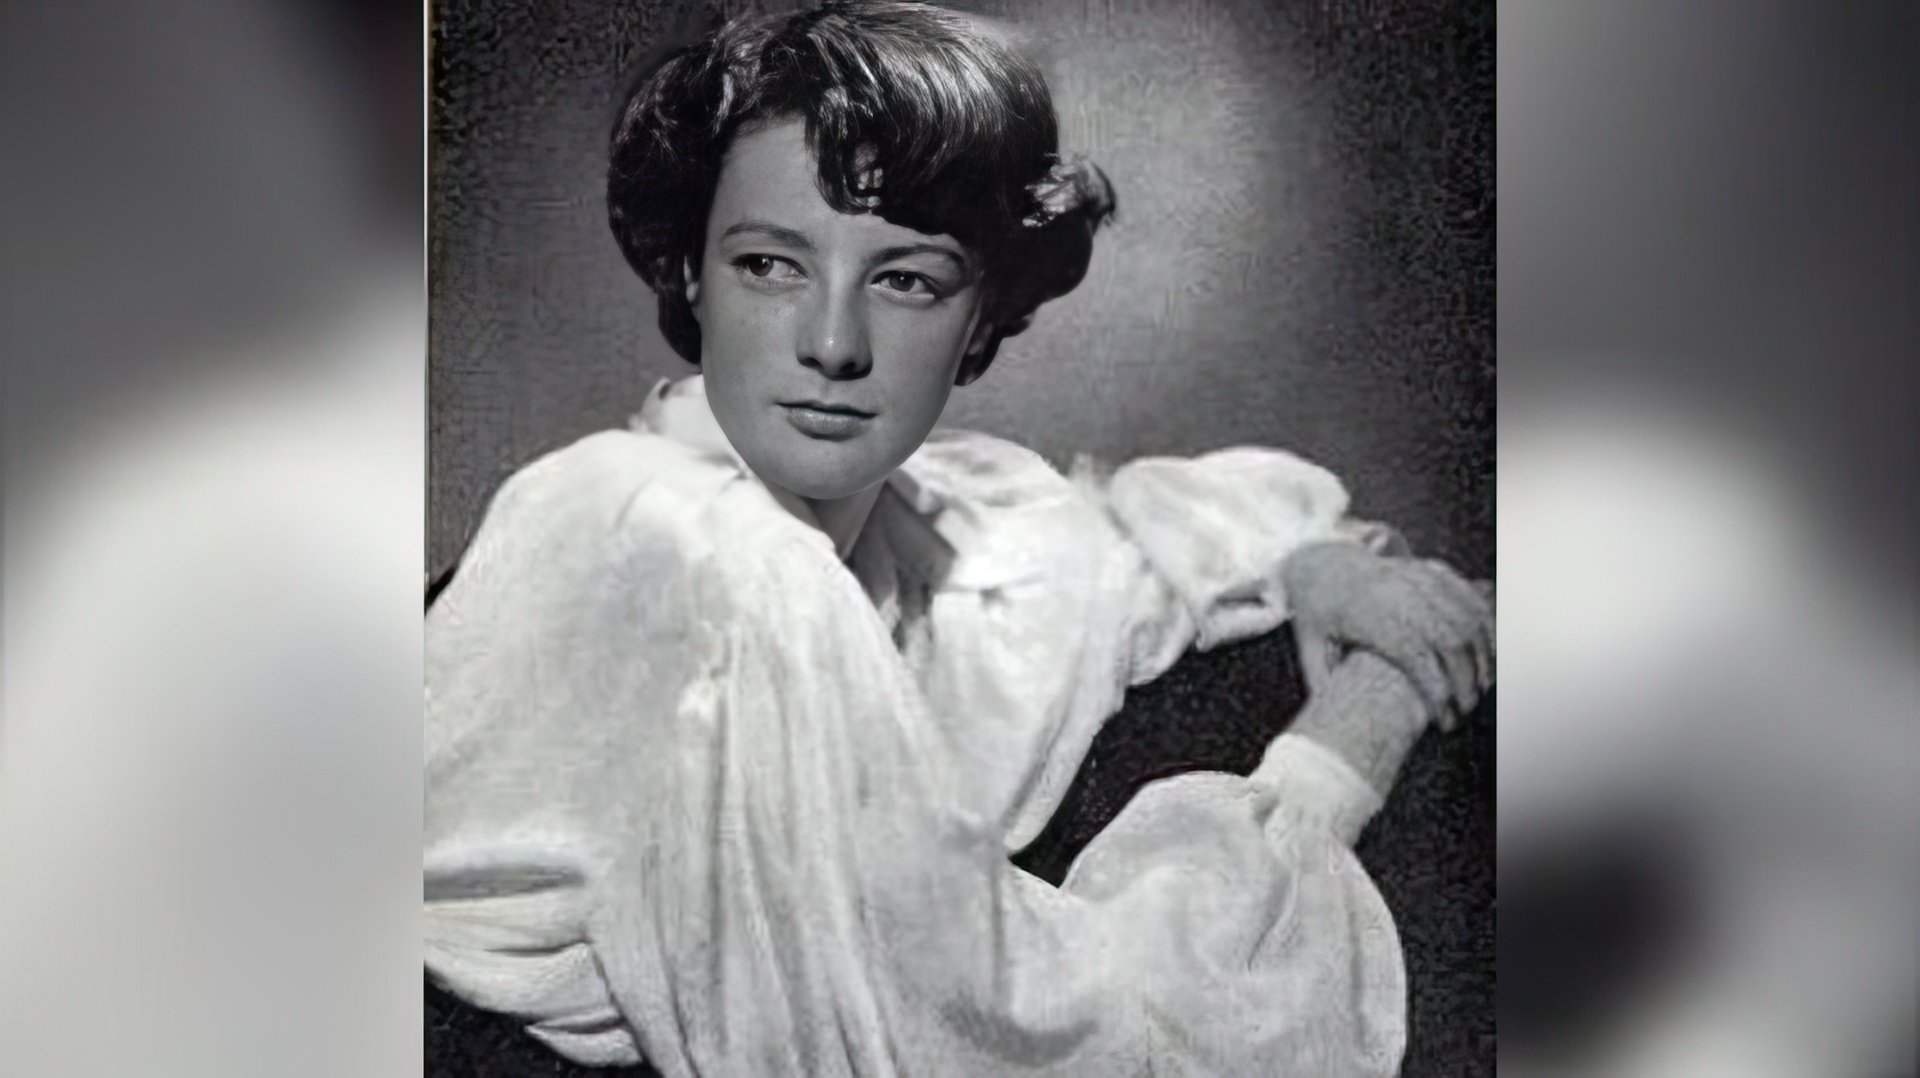 Maggie Smith as Viola (1952)